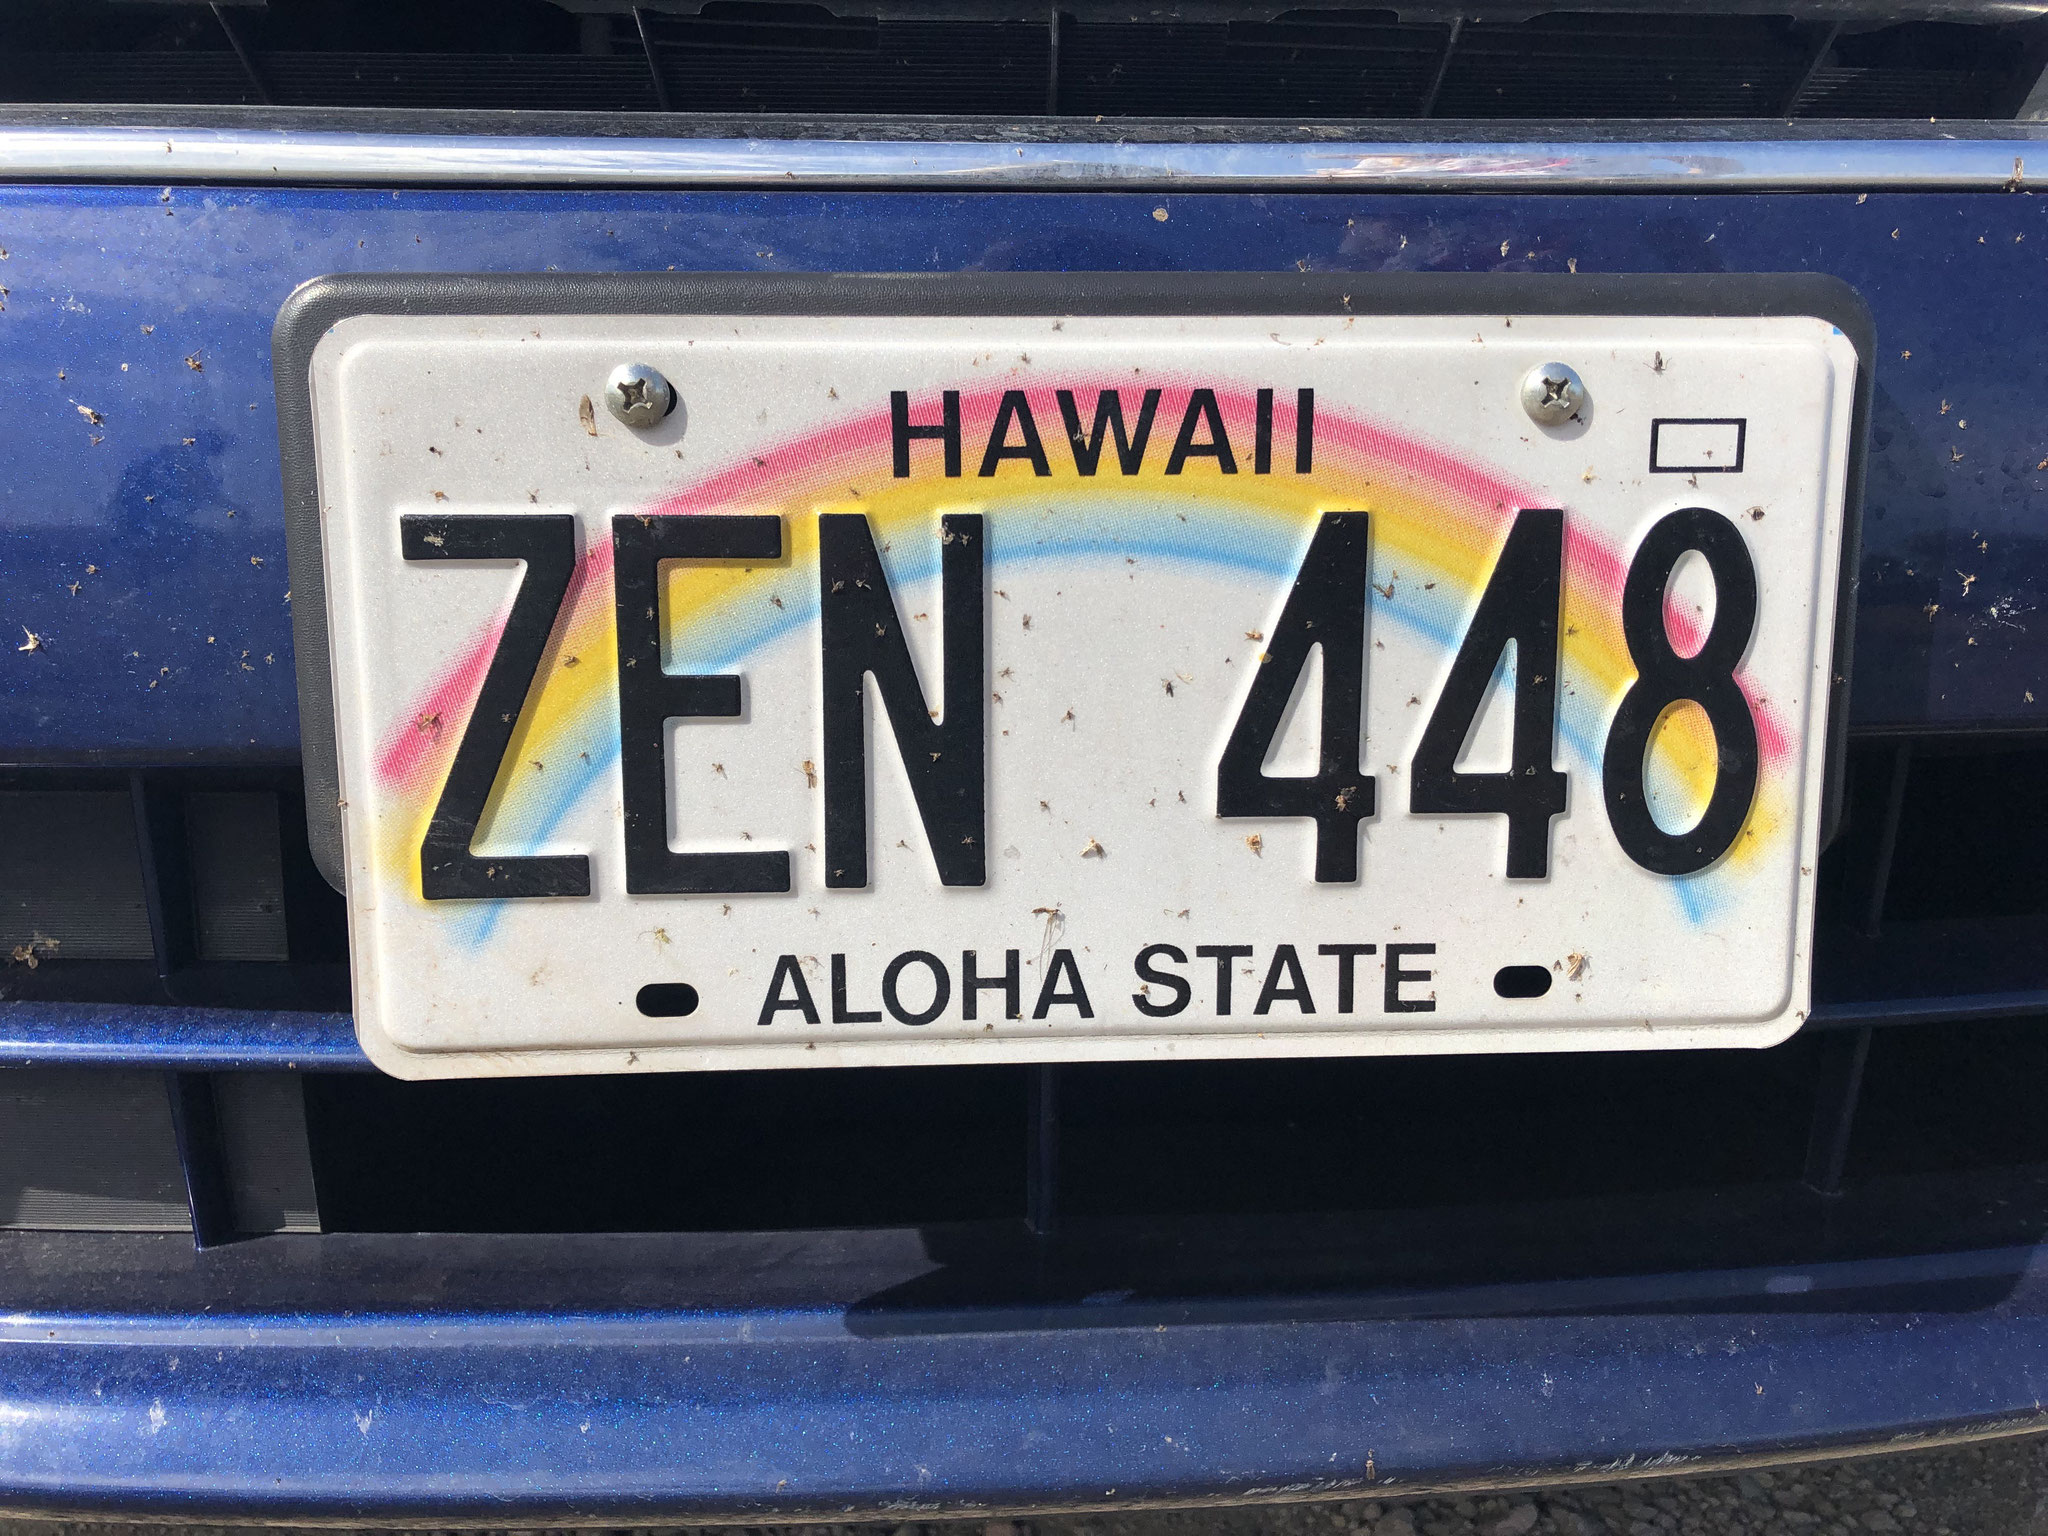 Our Nr. Plate in Hawaii starting with "ZEN" meaning a "condition of meditative sinking" which meets our state of mind in Hawaii